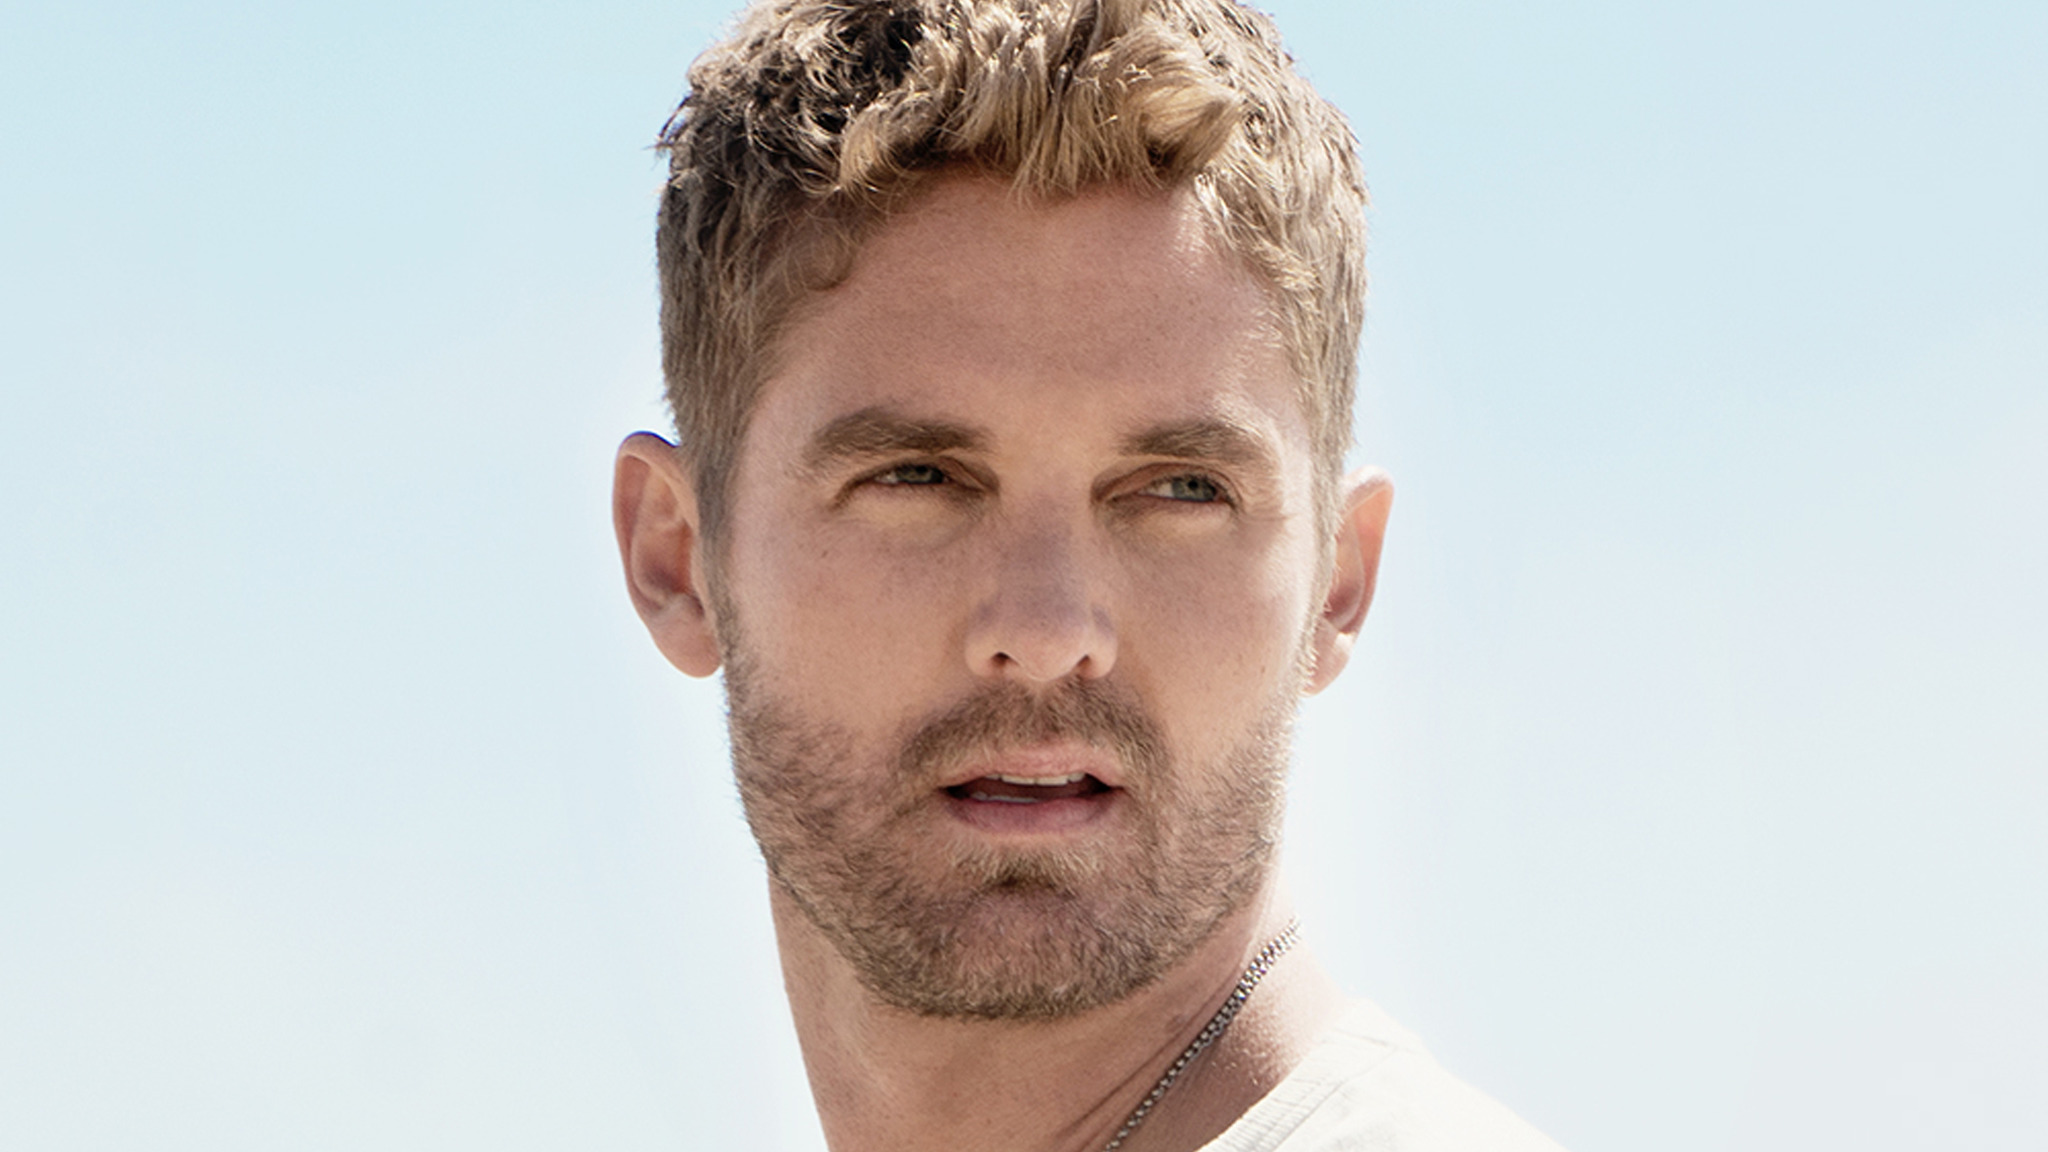 Brett Young Wallpaper Poster 24 x 14 inches 